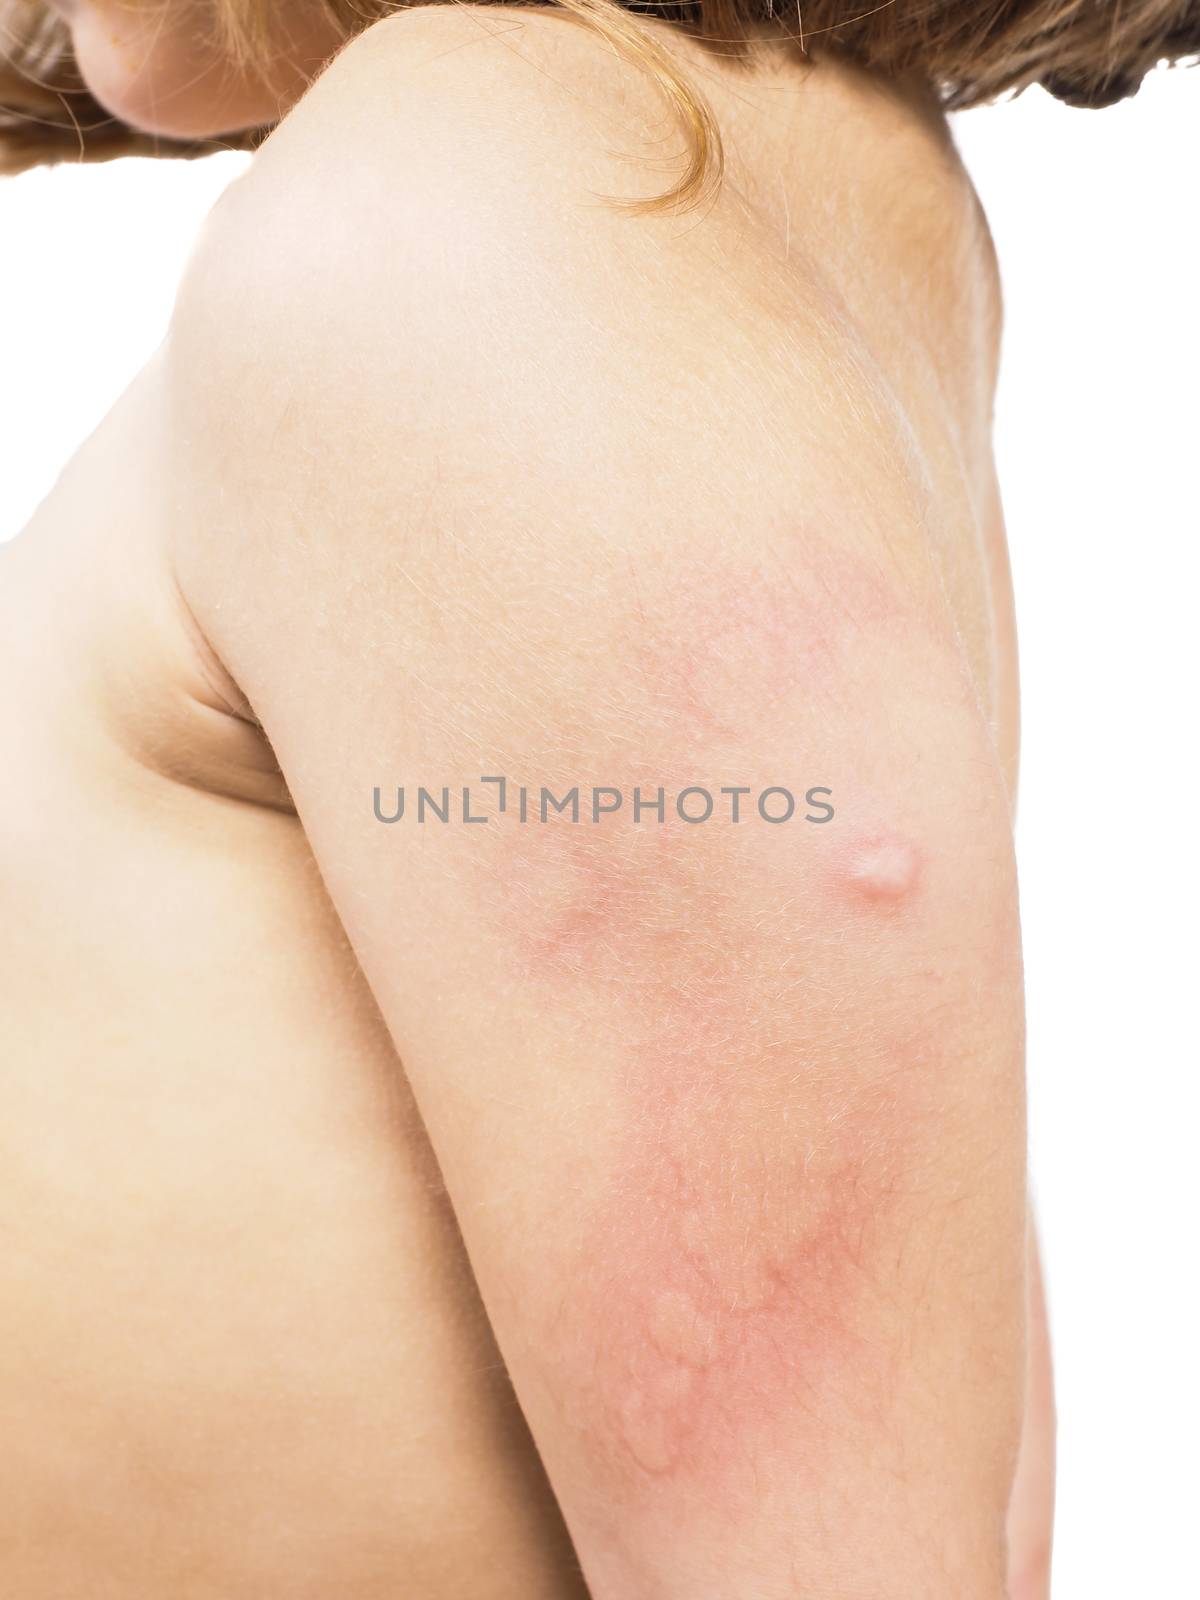 Child with hive, rash, or some skin abnormality on left arm under shoulder by Arvebettum